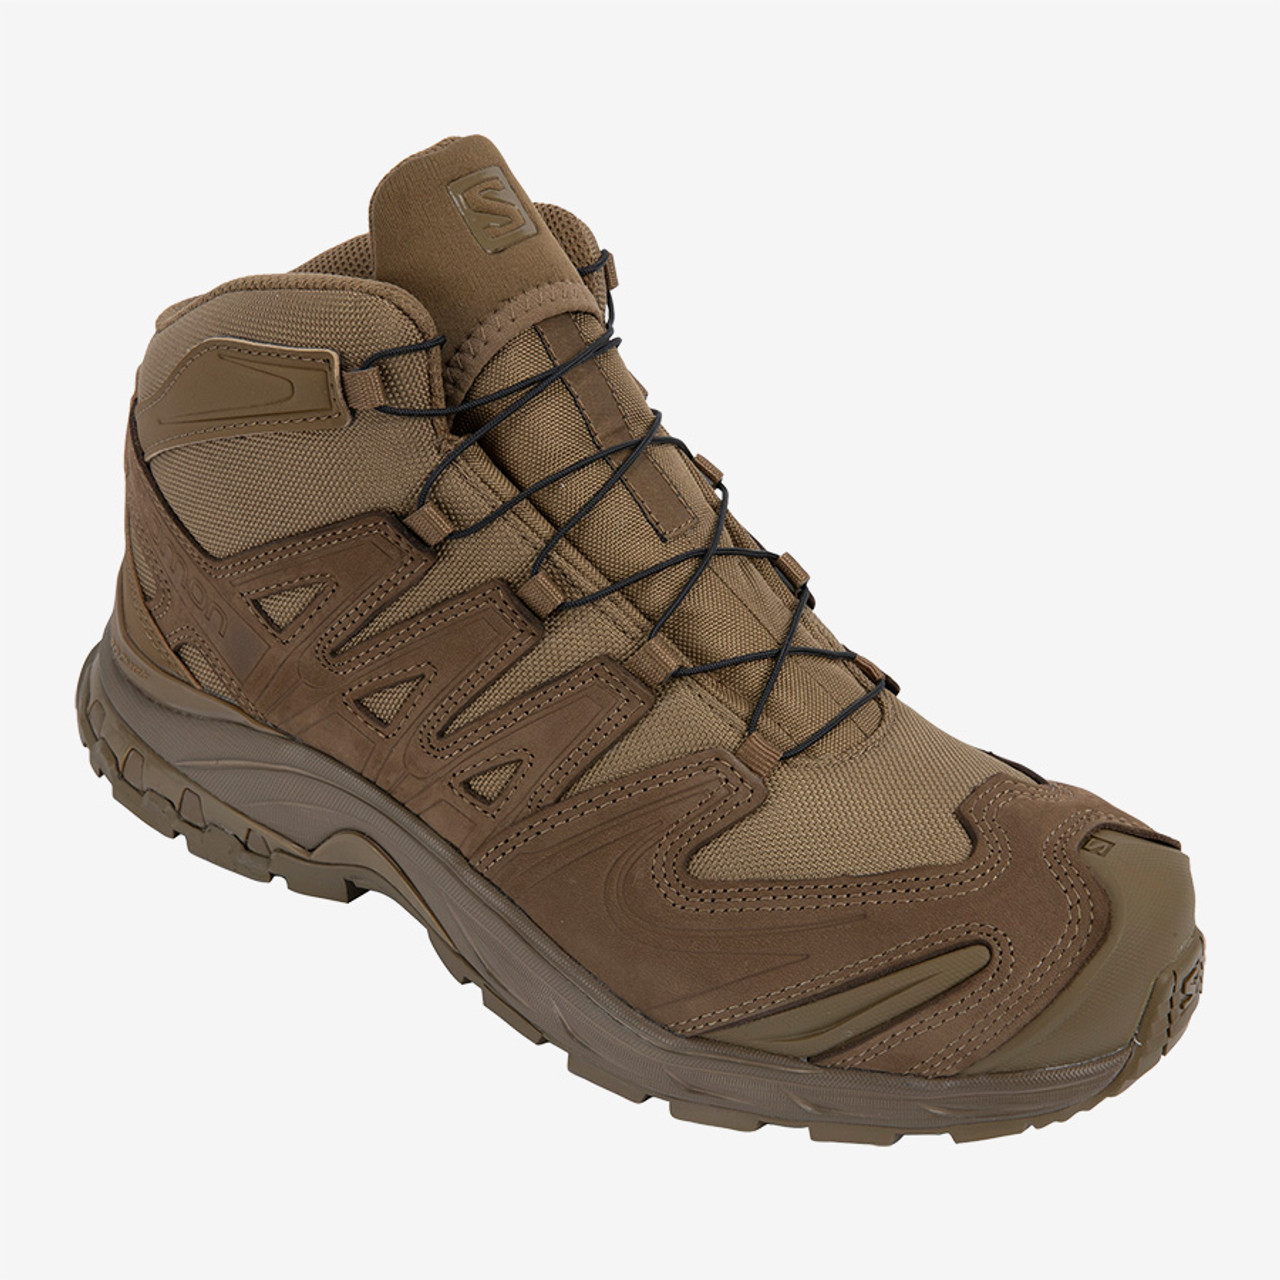 Salomon L40978200 XA Forces MID Unisex 5 inch Boots, Uniform or Casual, Lightweight, Coyote Brown